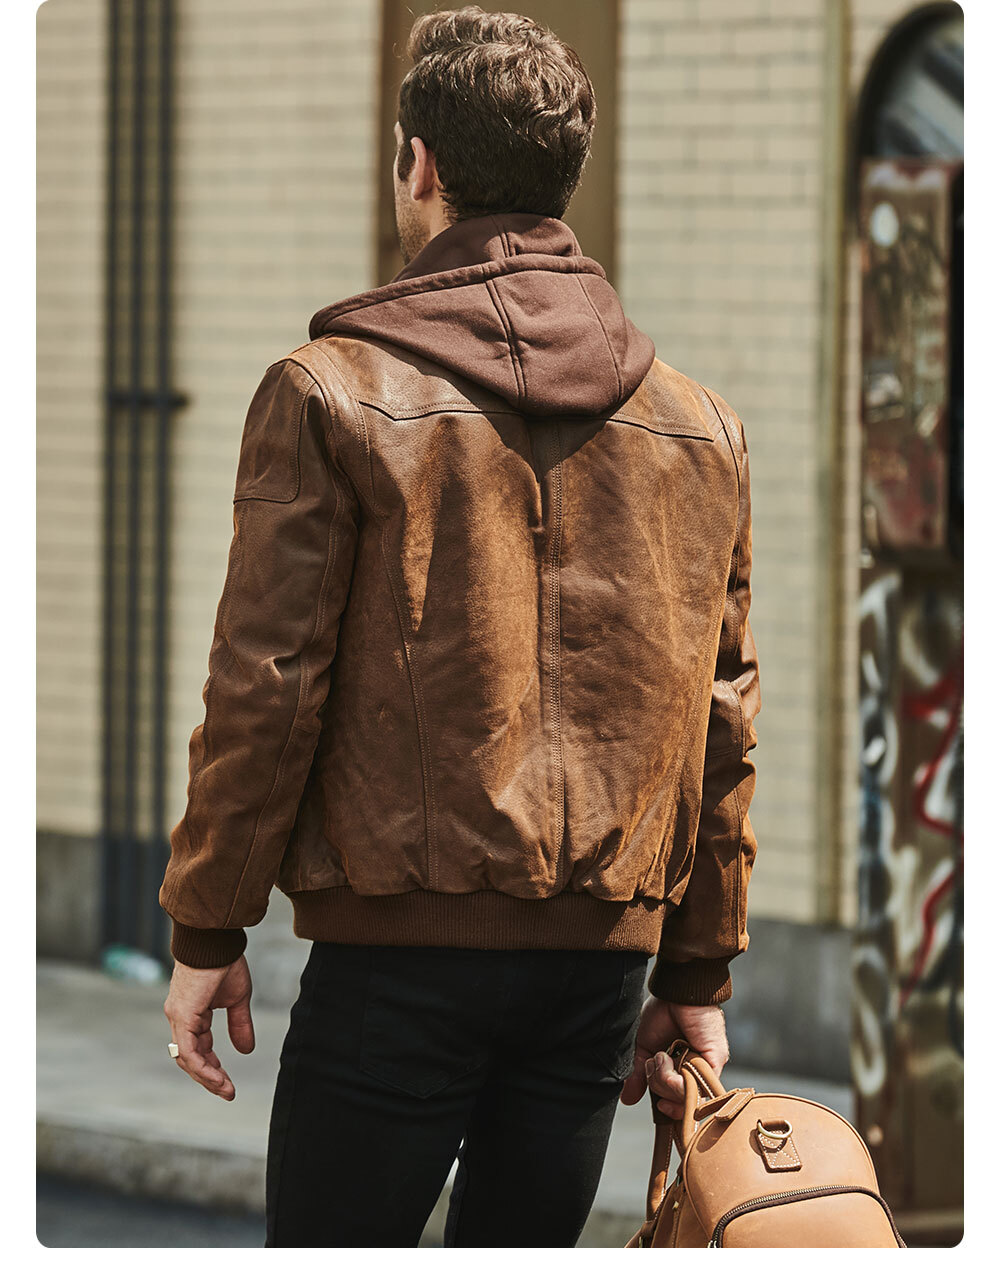 Men's Leather Removable Hooded Jacket Rib Trim MXGX282 Buy removable hooded leather moto jacket| leather removable hooded jacket brands